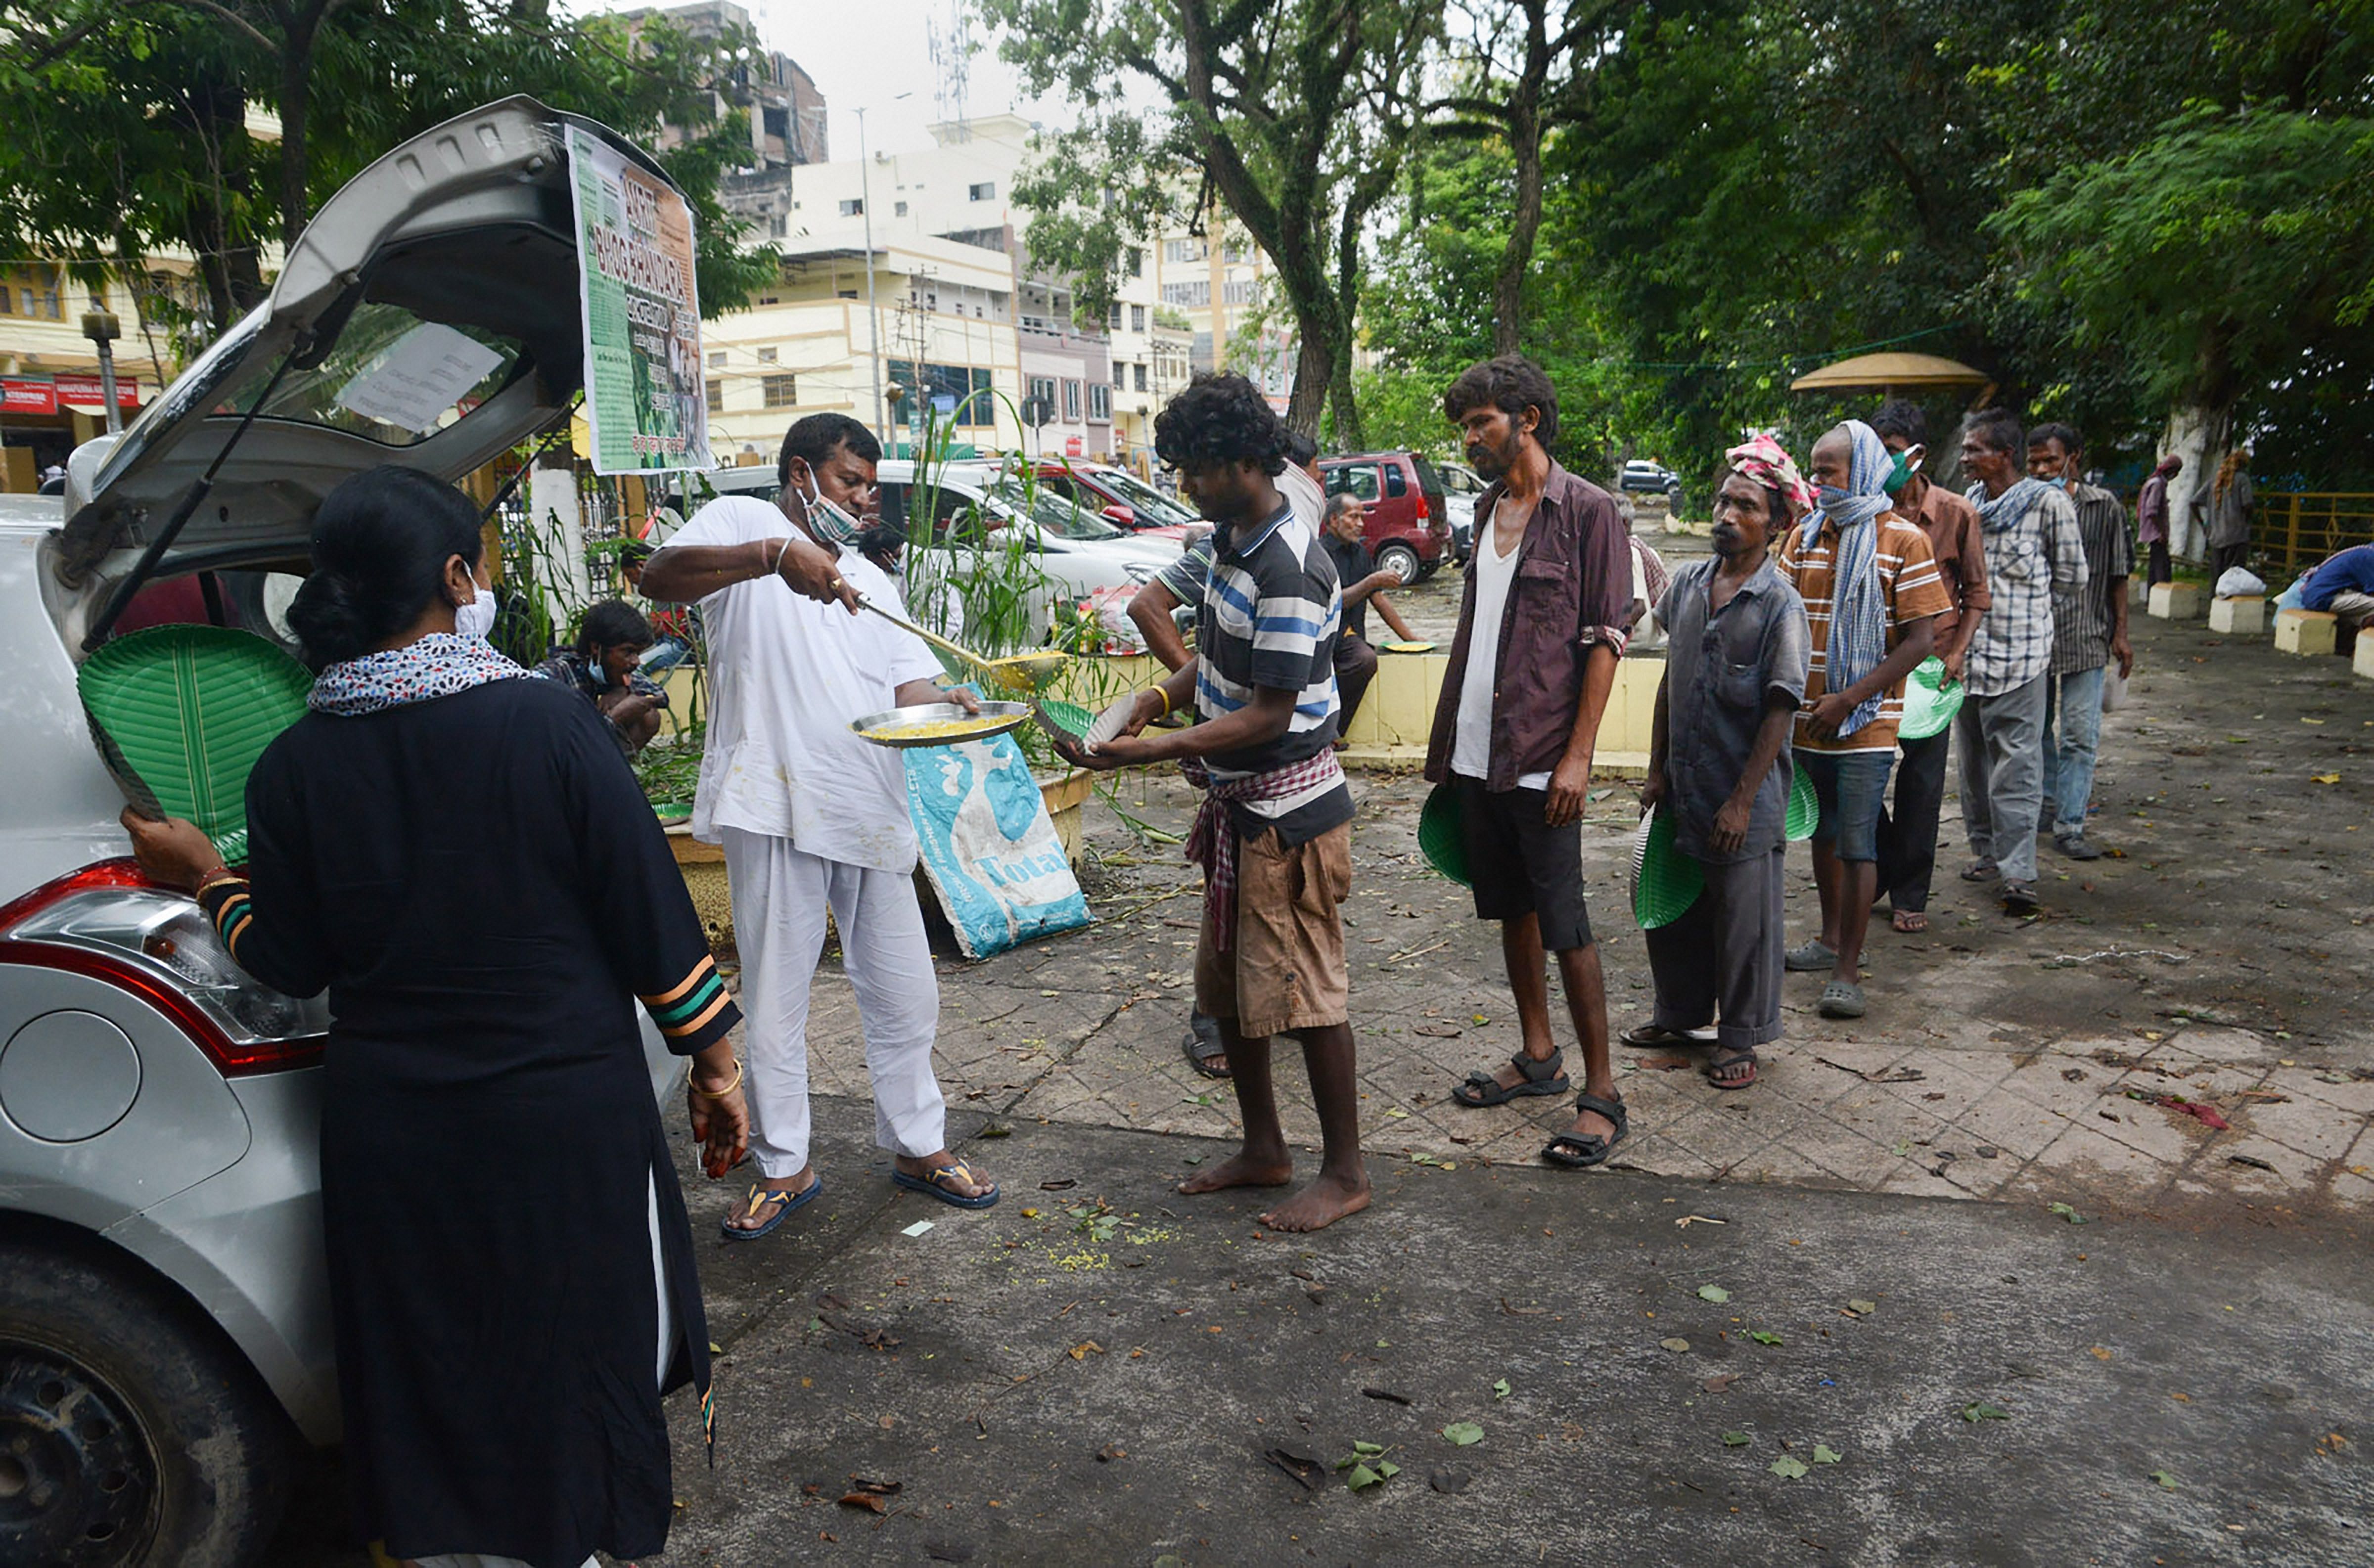 Volunteers distribute food among needy people during the total lockdown imposed by the state government in the wake of coronavirus pandemic. Credits: AFP Photo